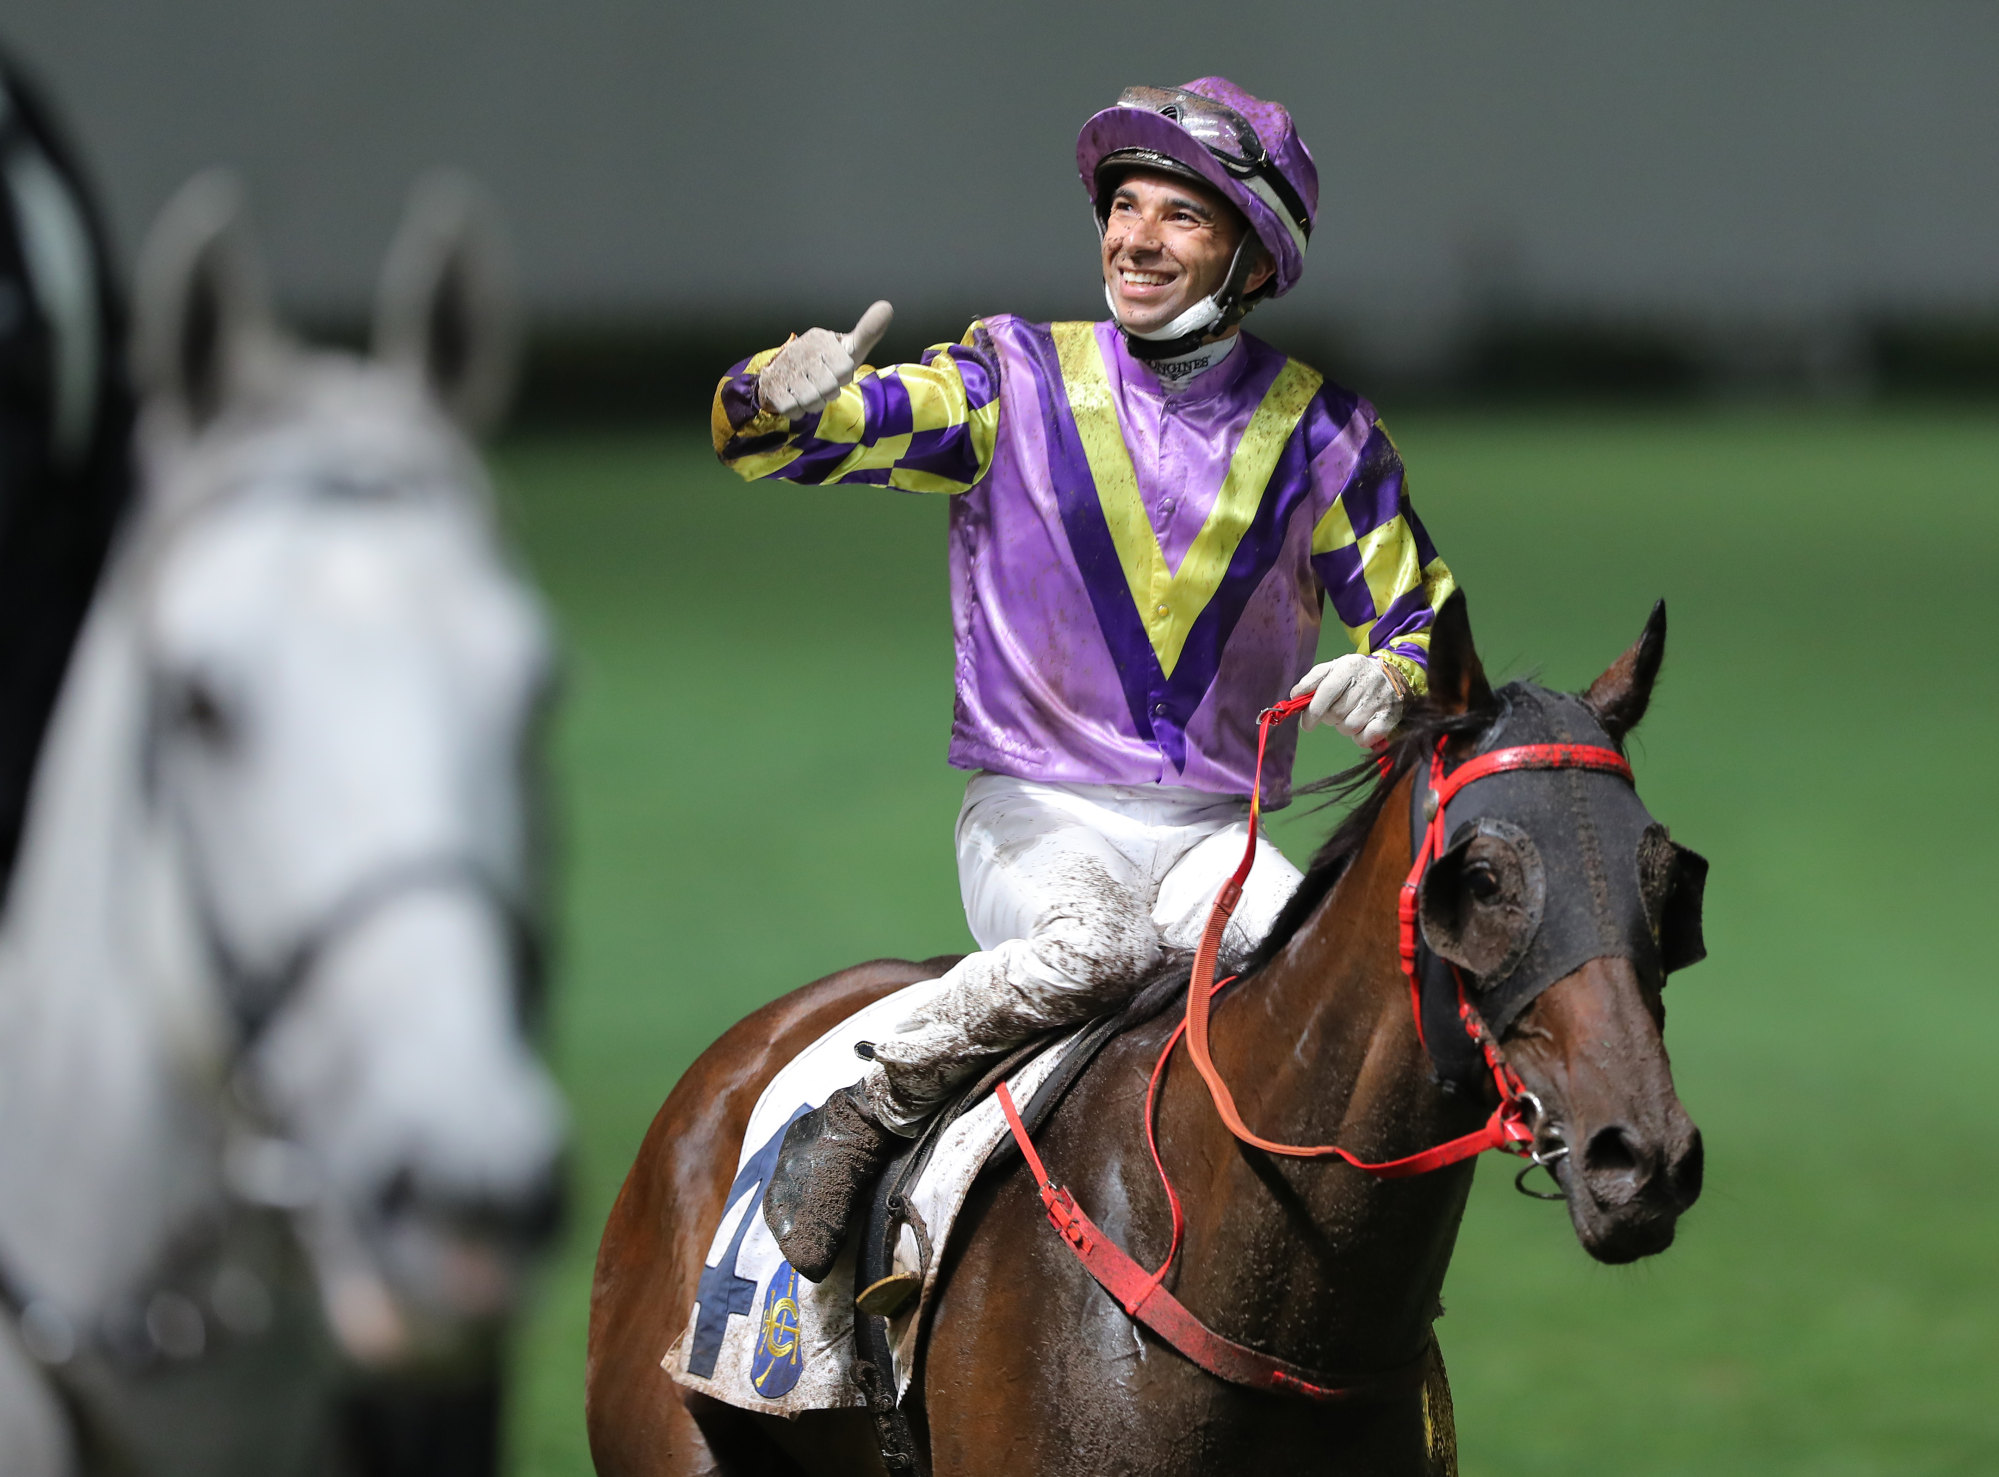 Can the Jockey Club attract big-name riders, or will a Covid-19 hangover loom large?